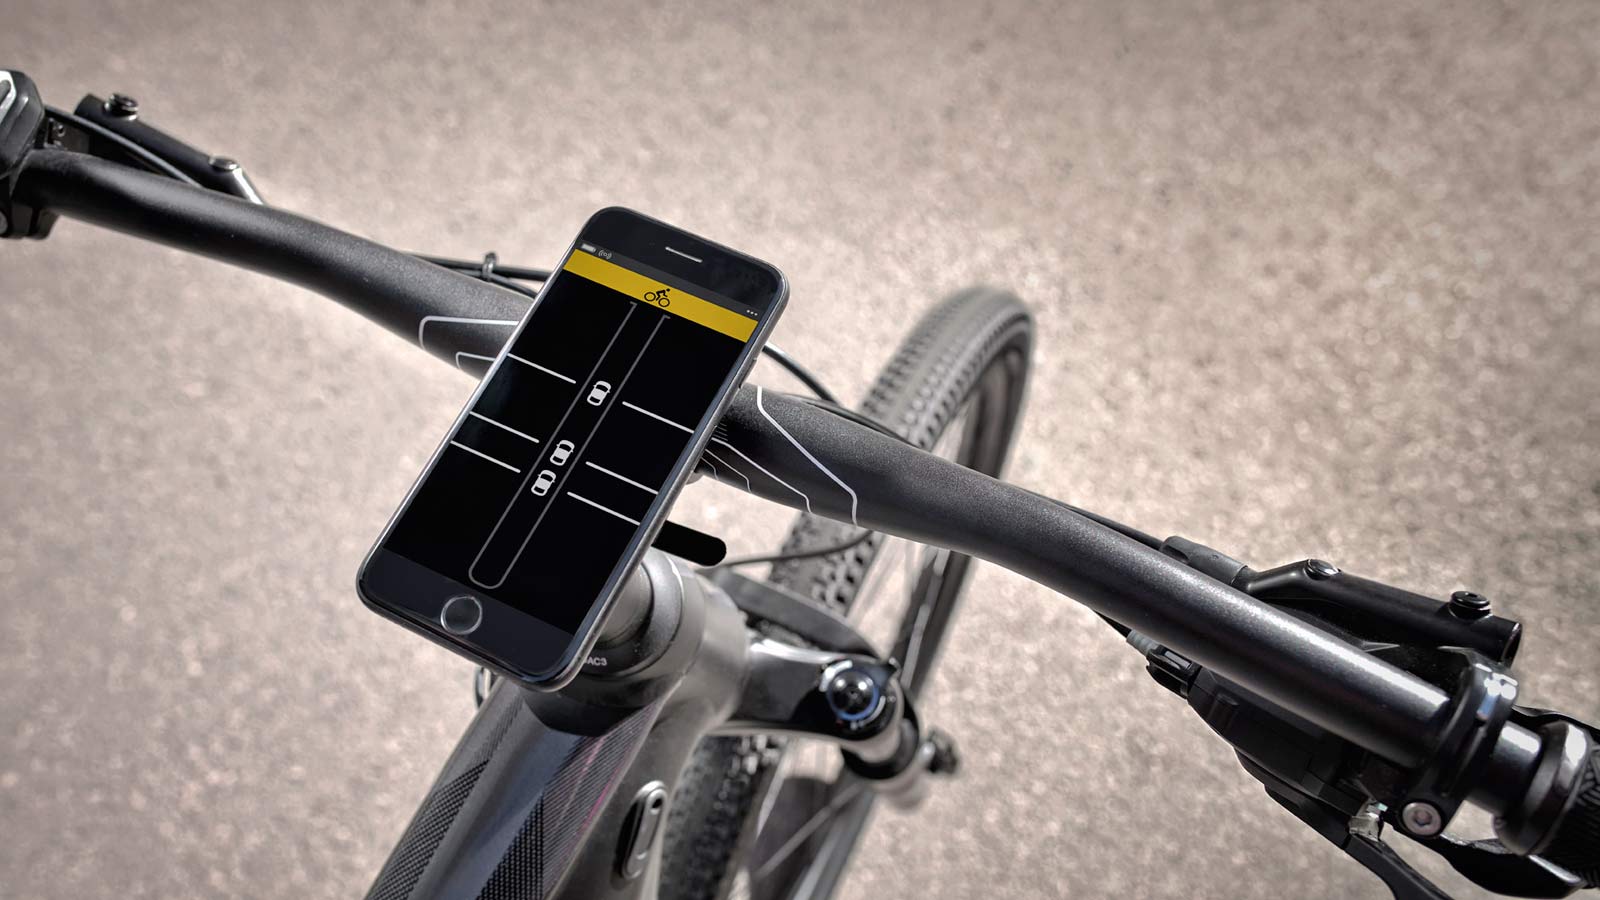 afgår Interesse Distribuere Garmin Varia rearview radar & new App add affordable road safety options,  with or without a Garmin GPS - Bikerumor